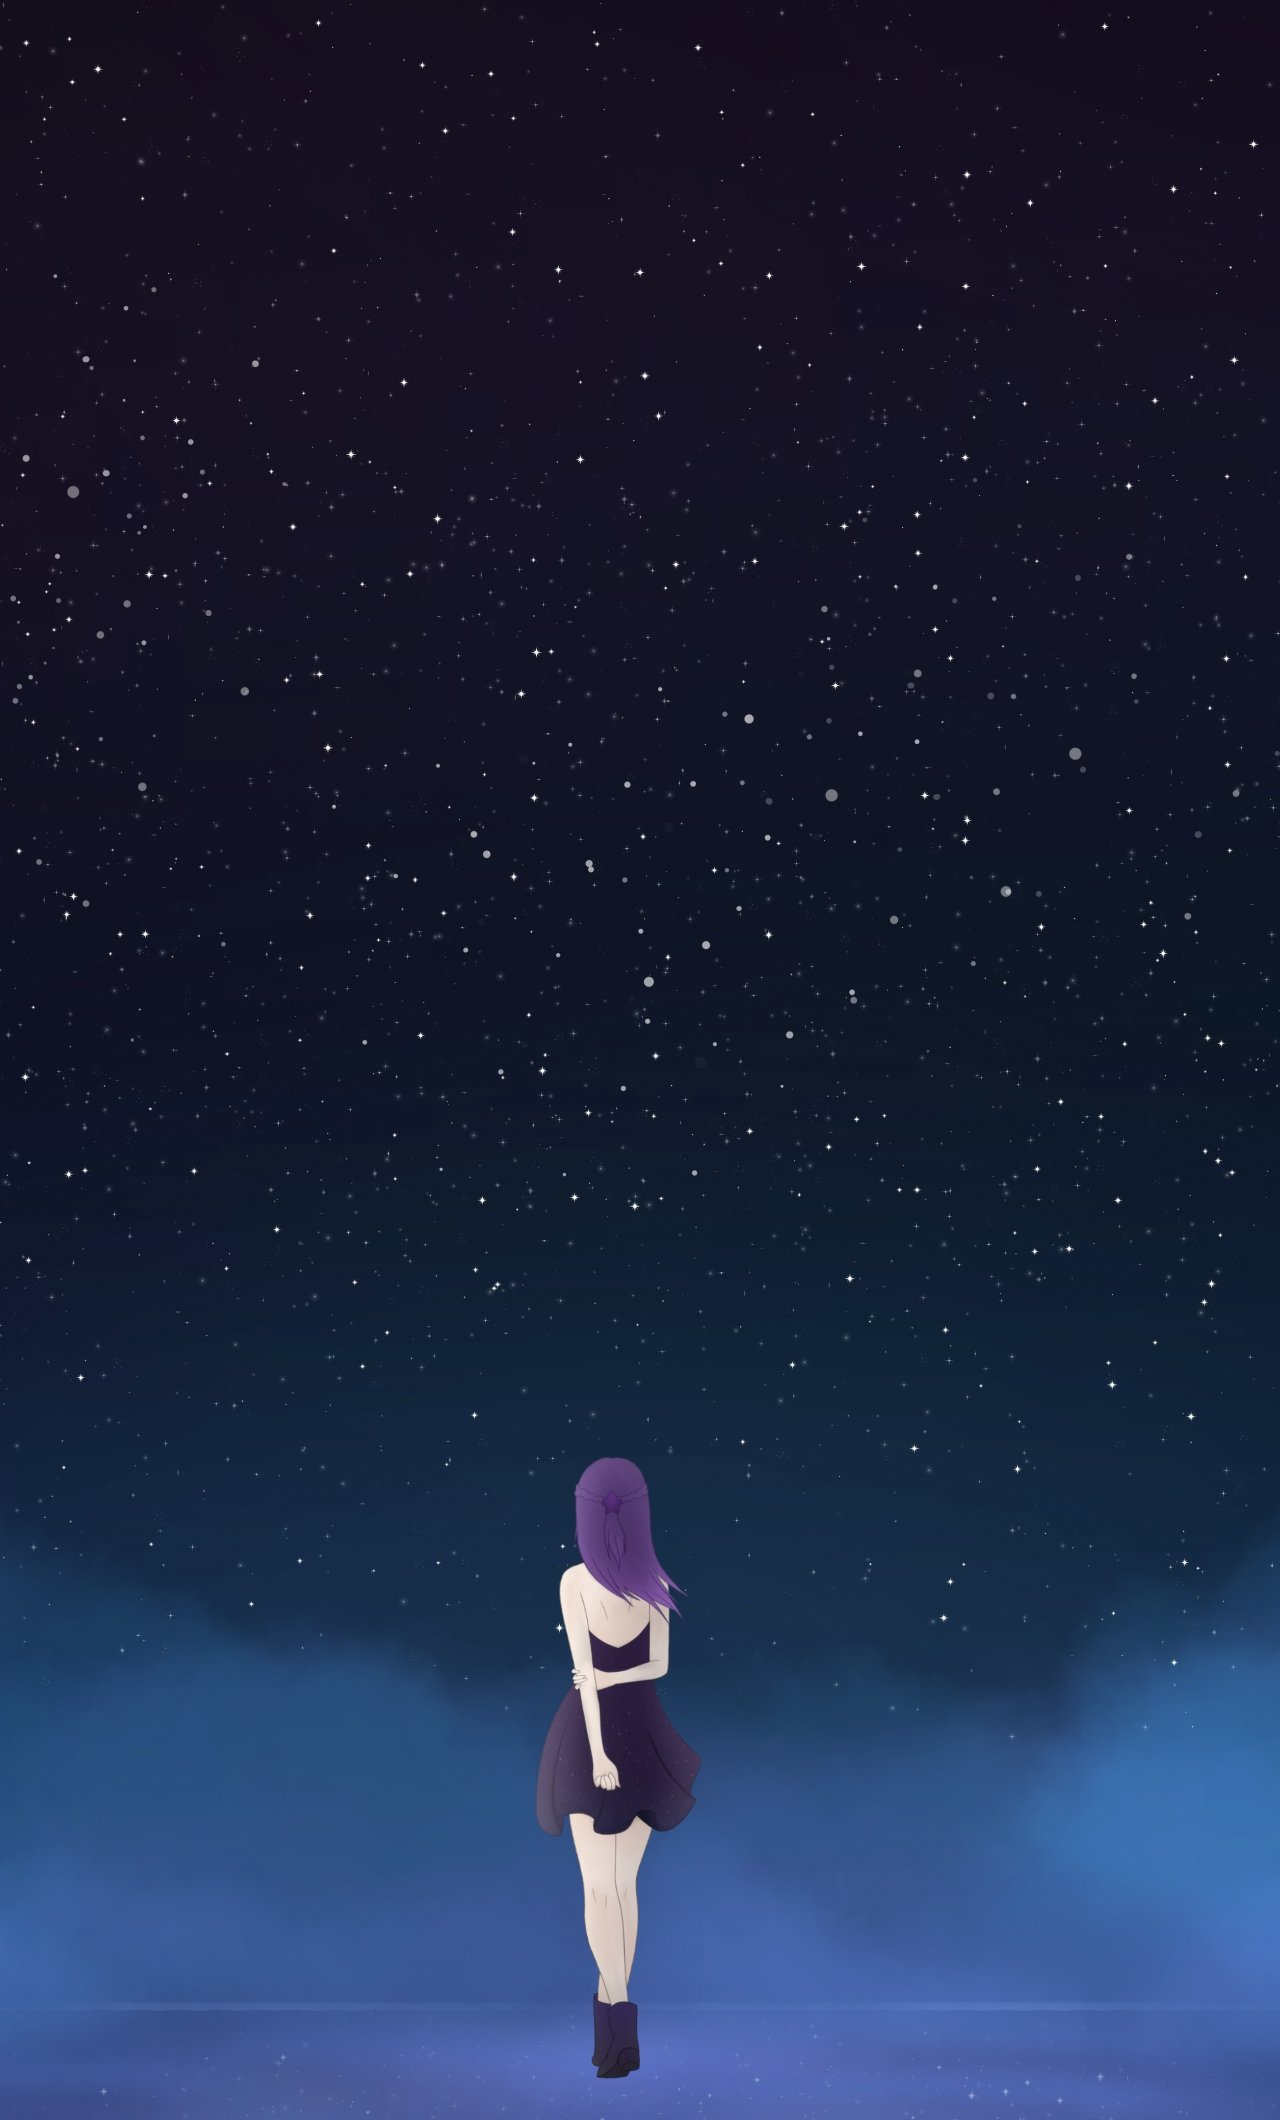 Download starry sky, fantasy, anime girl, minimal, night 1280x2120 wallpaper, iphone 6 plus, 1280x2120 HD image, background, 19808